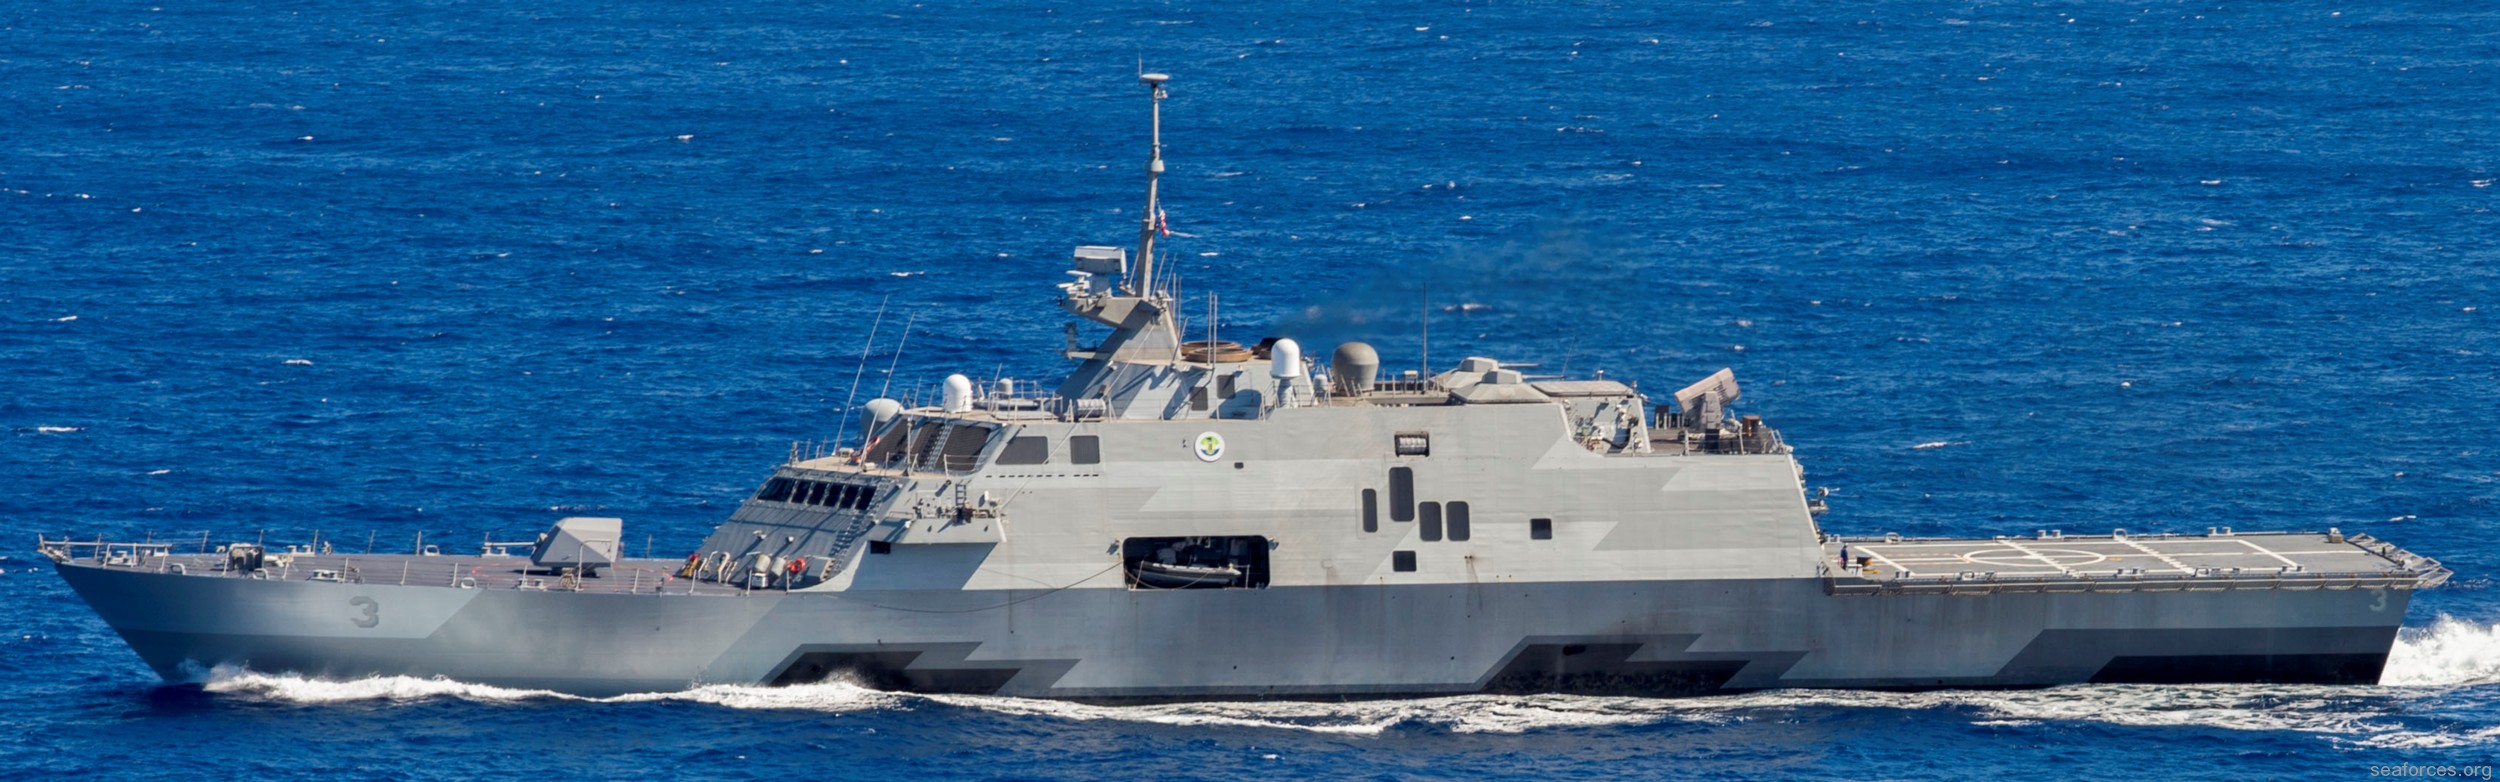 lcs-3 uss fort worth littoral combat ship freedom class us navy 38